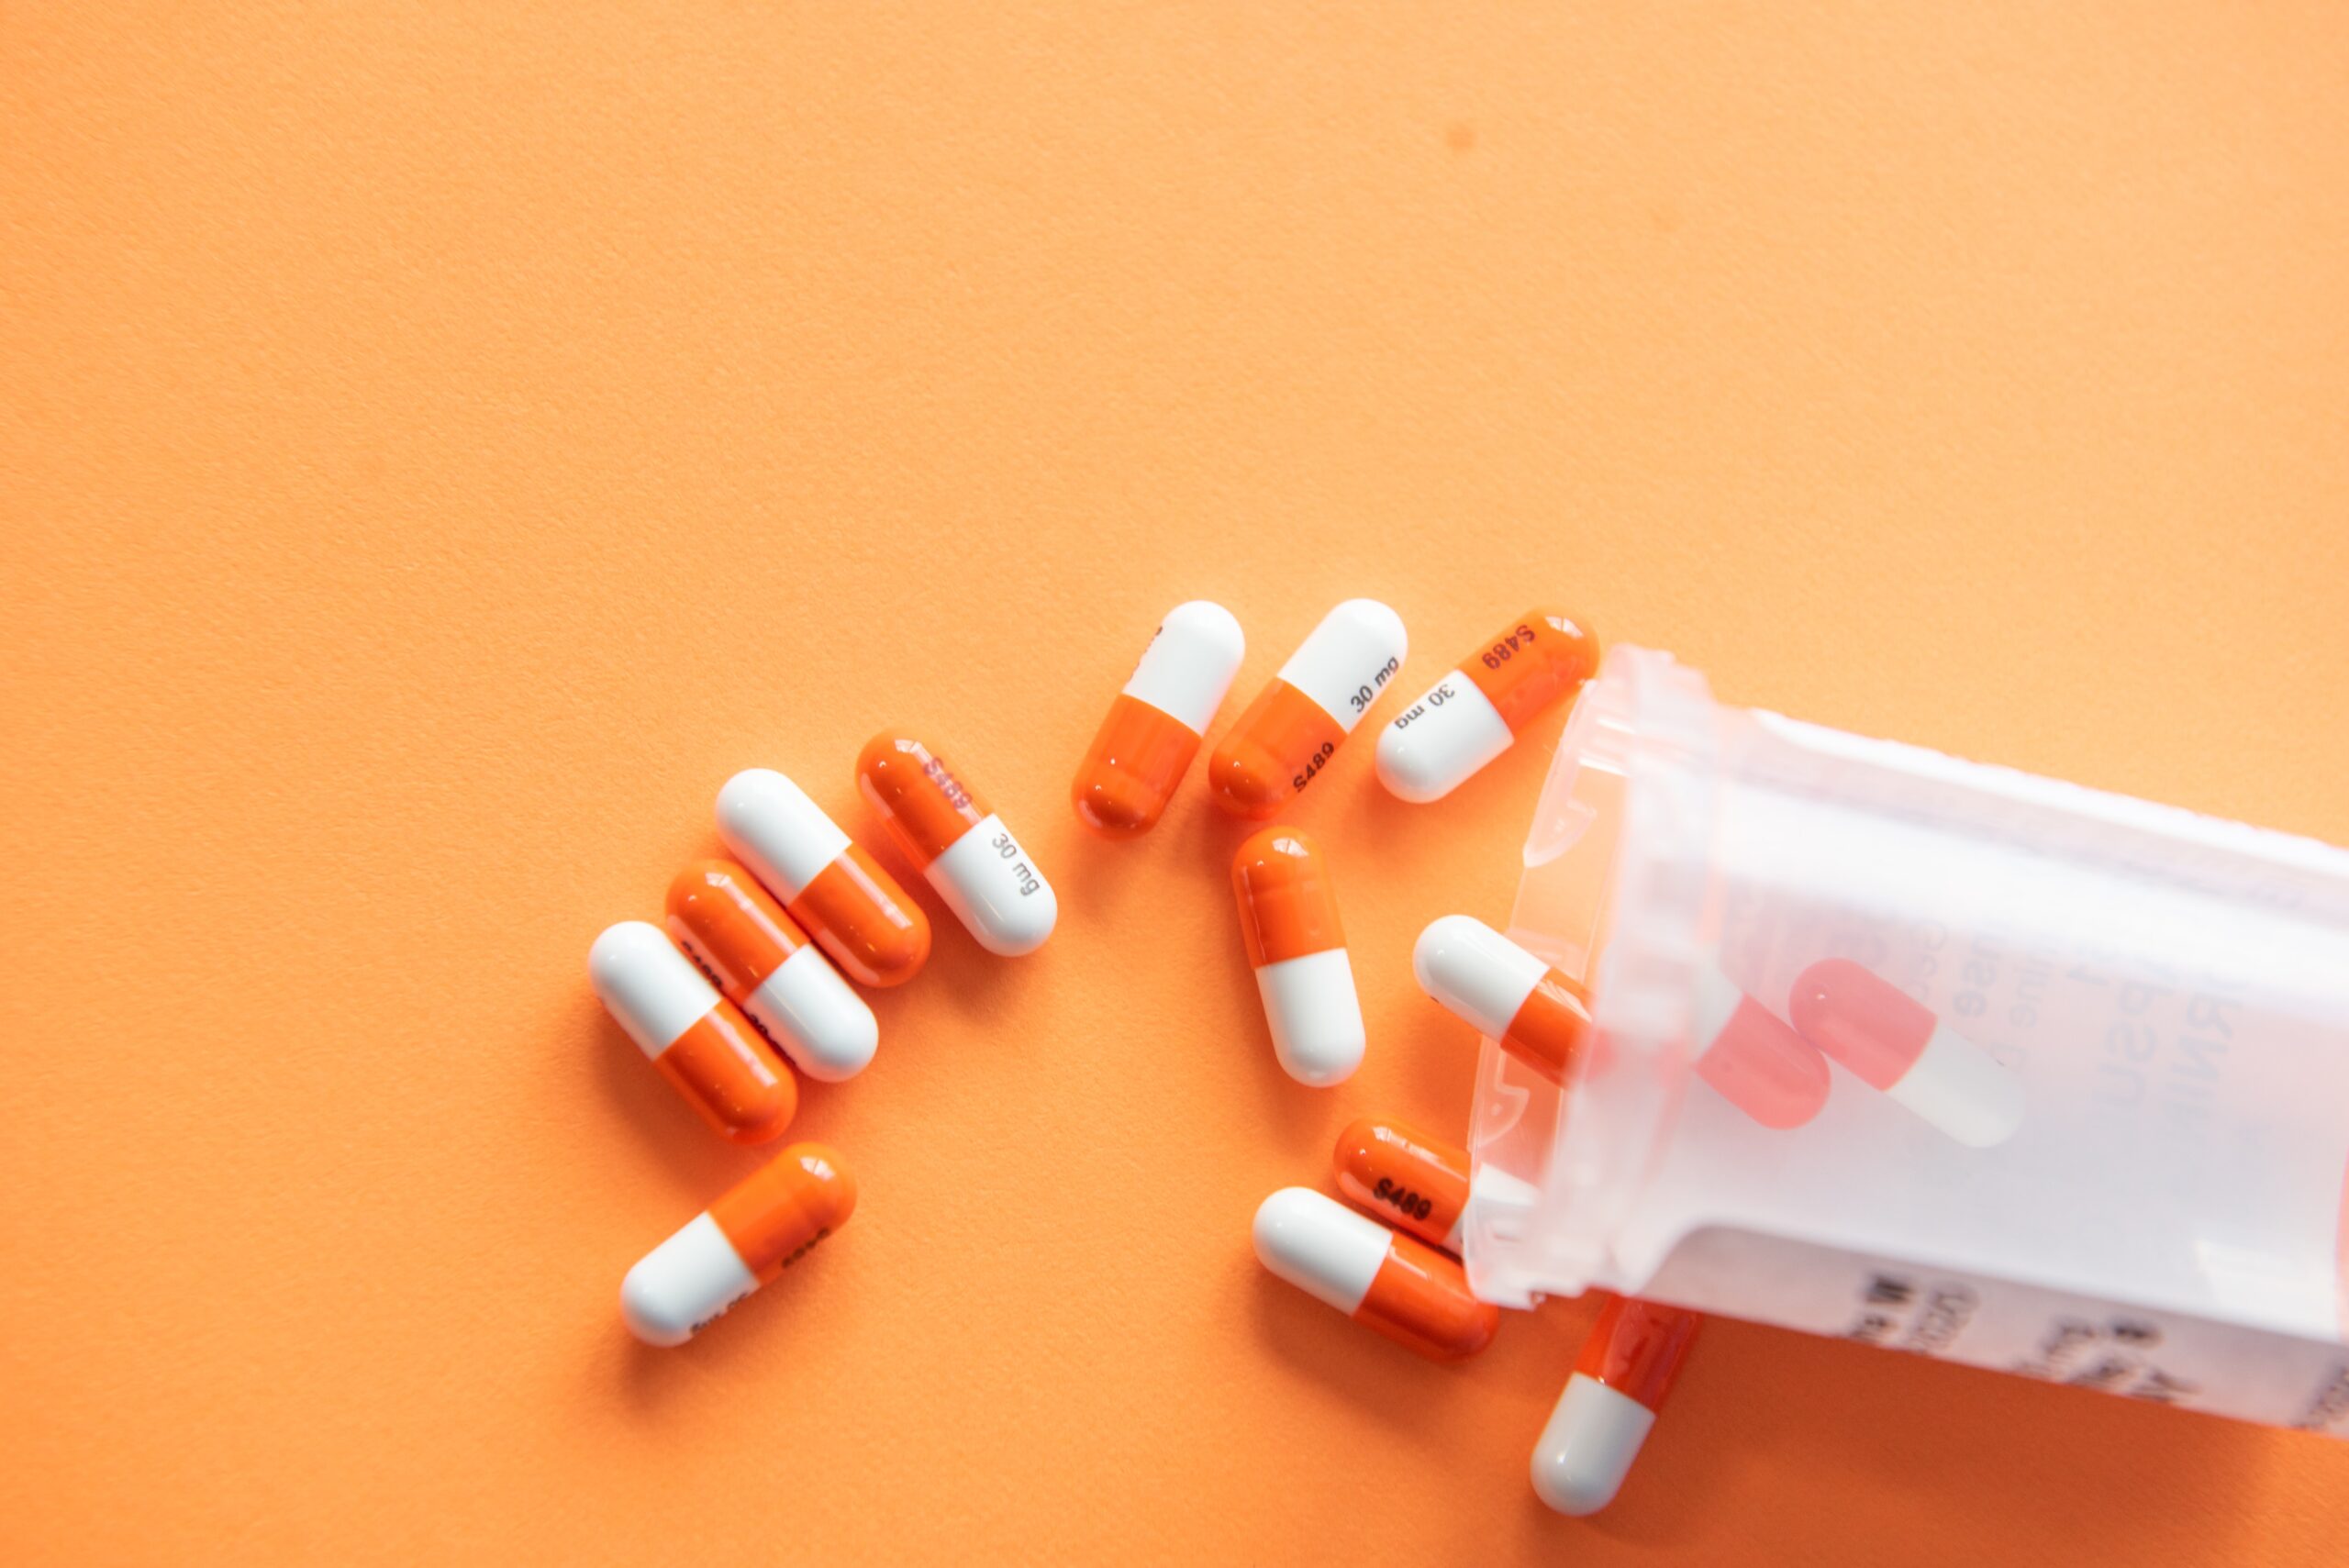 Pills spilling out of a bottle against an orange background